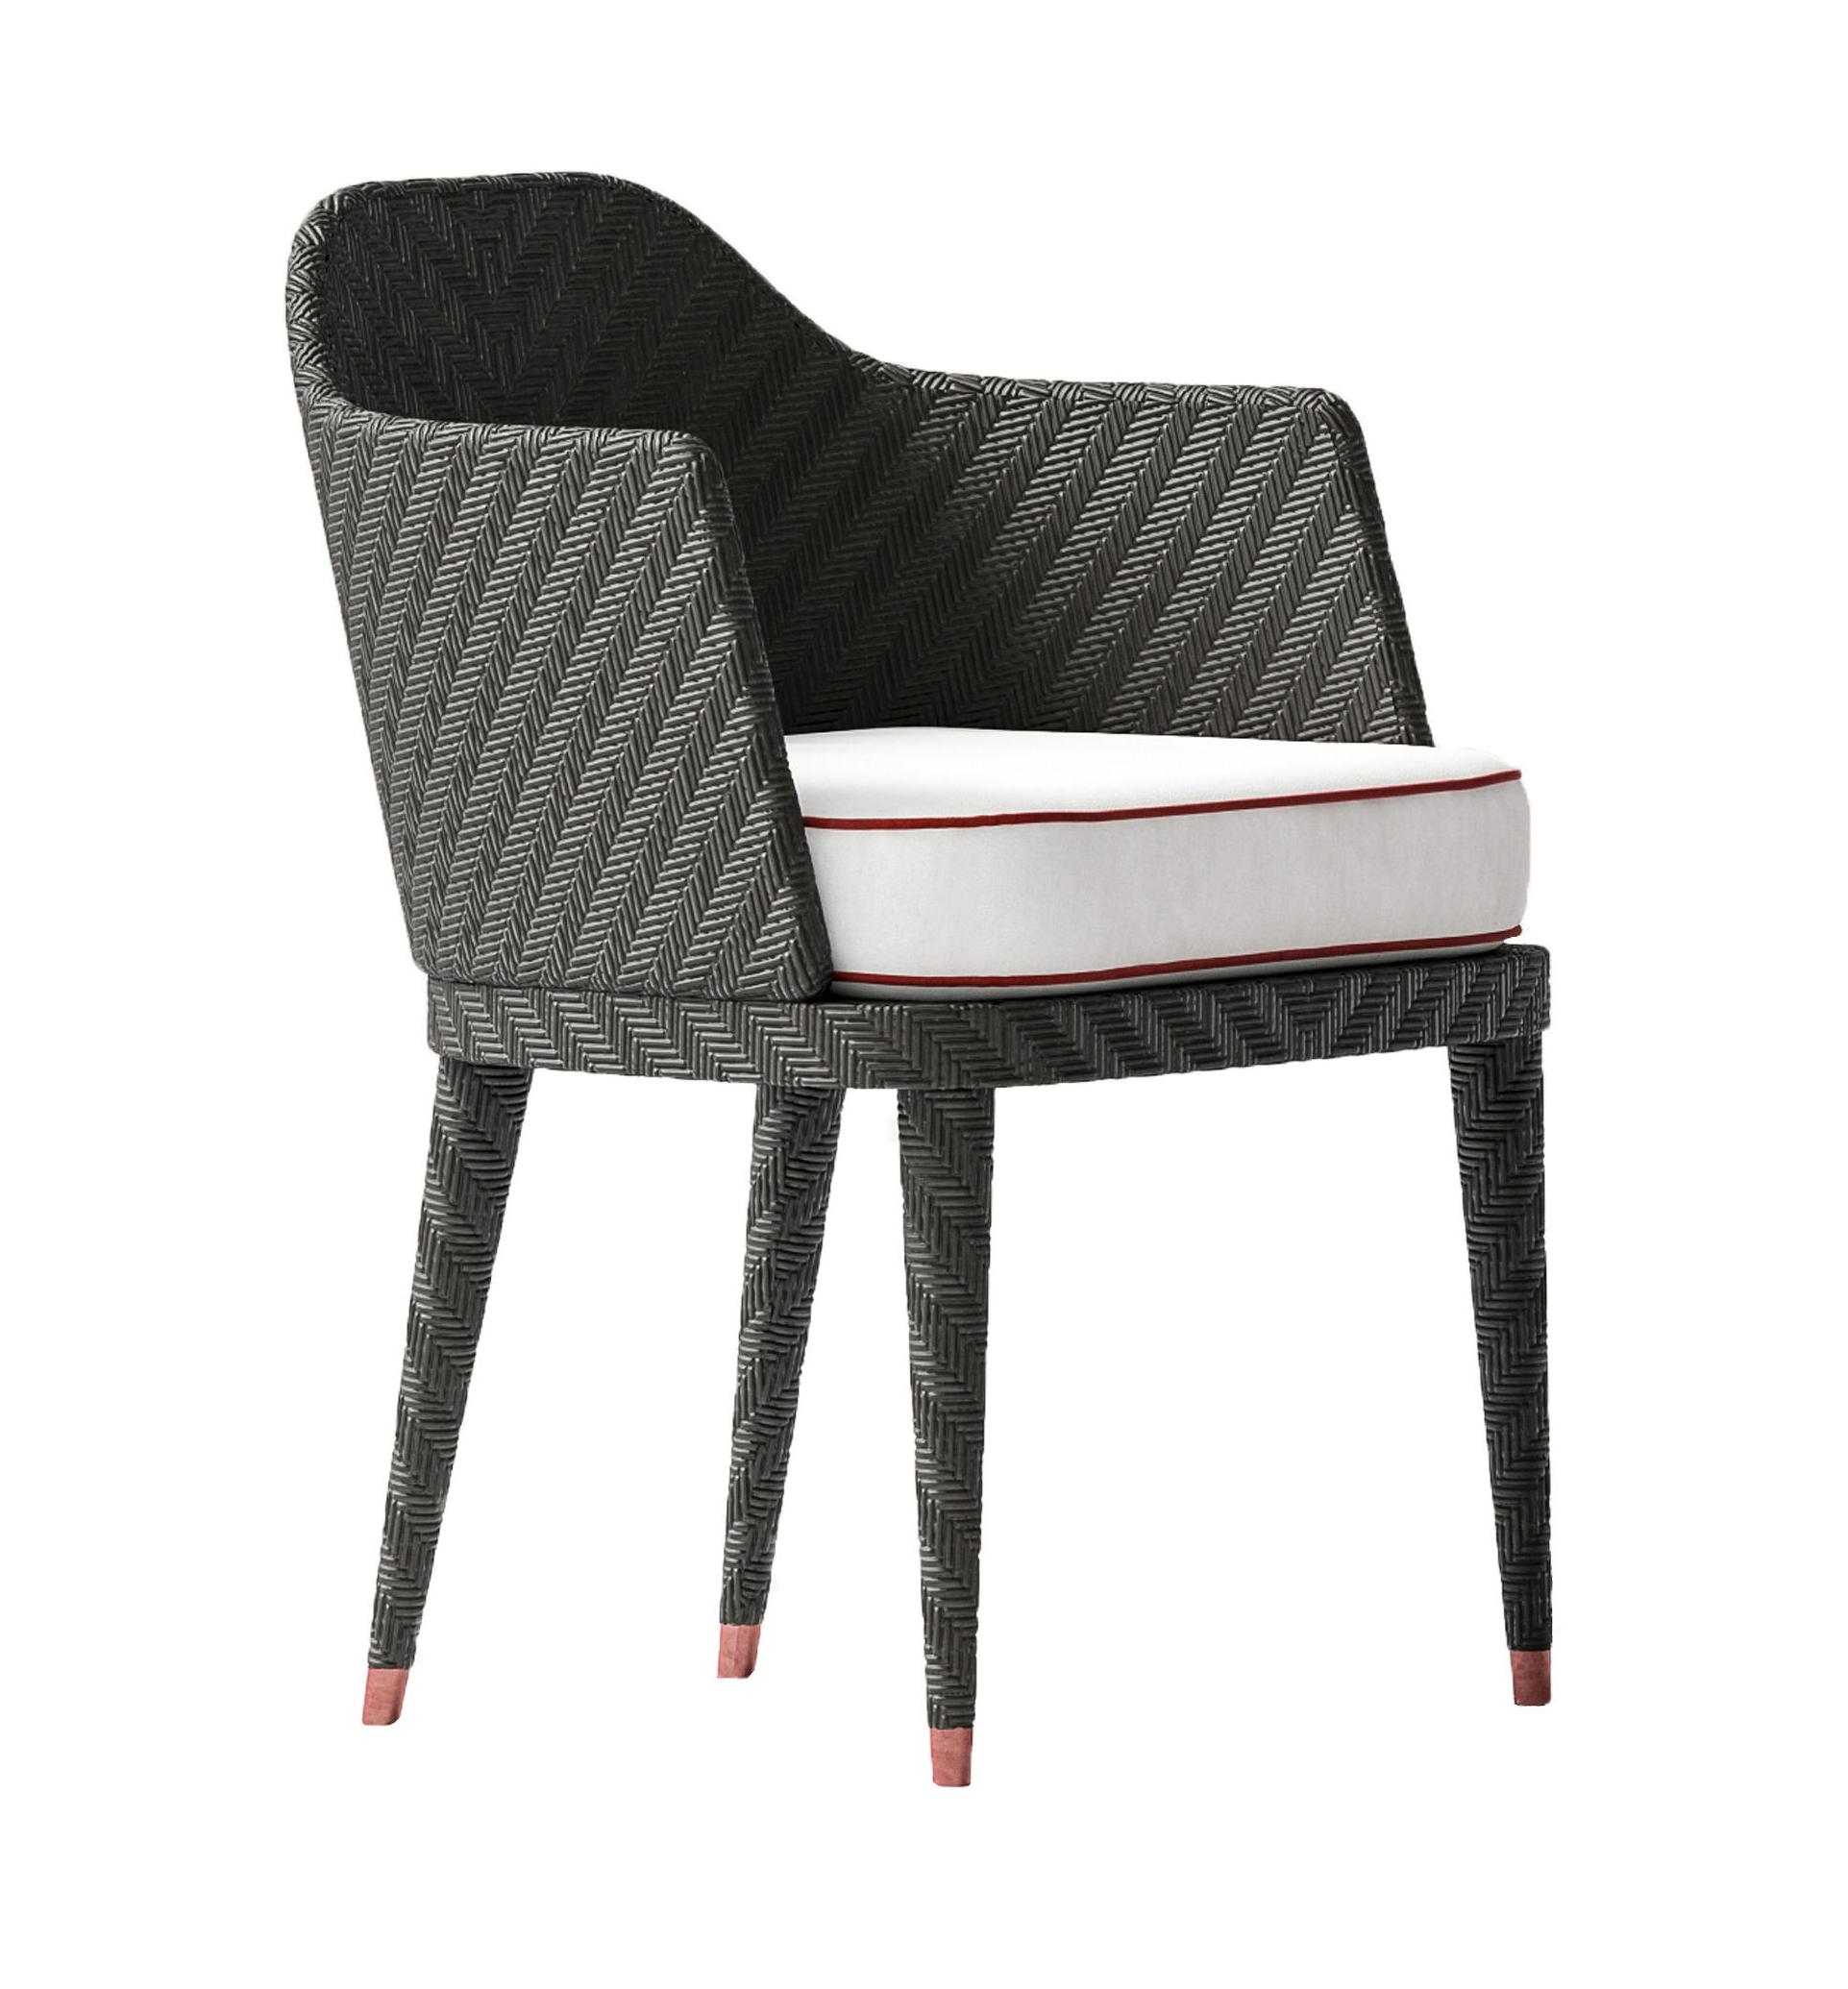 Italian Outdoor Chair With Armrests Comfort